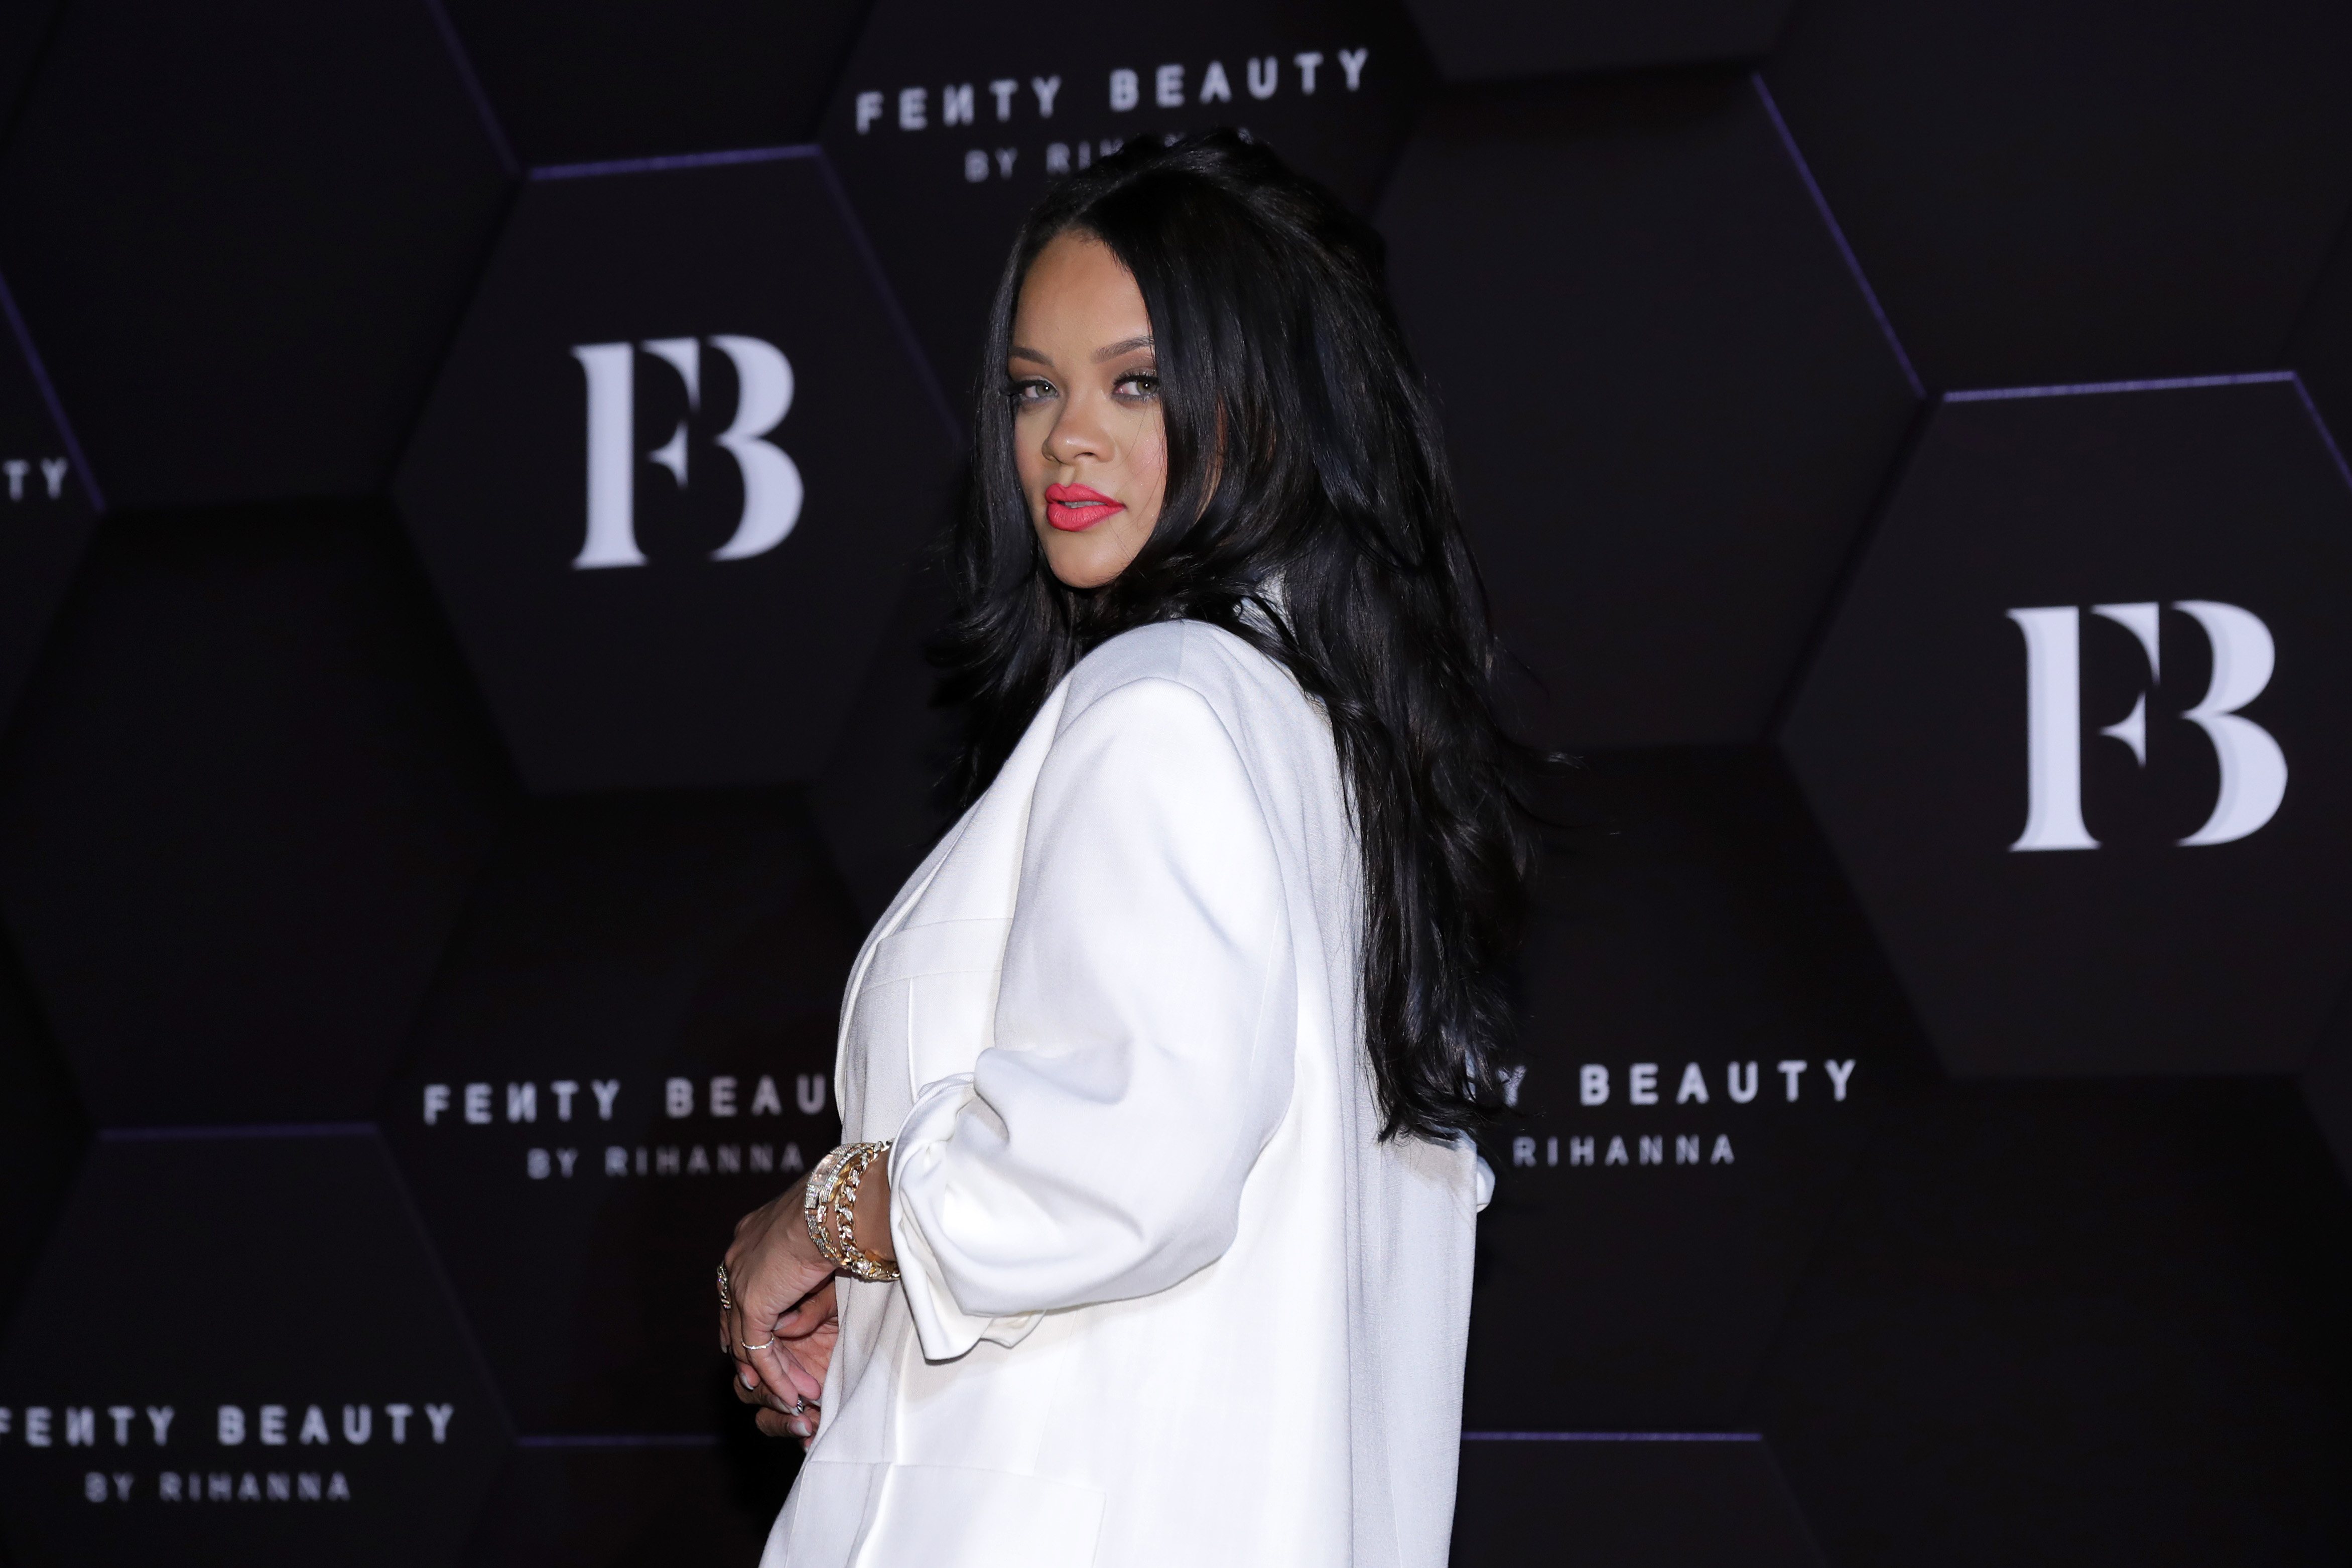 Rihanna attends an event for 'FENTY BEAUTY' artistry beauty talk with Rihanna at Lotte World Tower on September 17, 2019 in Seoul, South Korea. (Han Myung-Gu—WireImage)